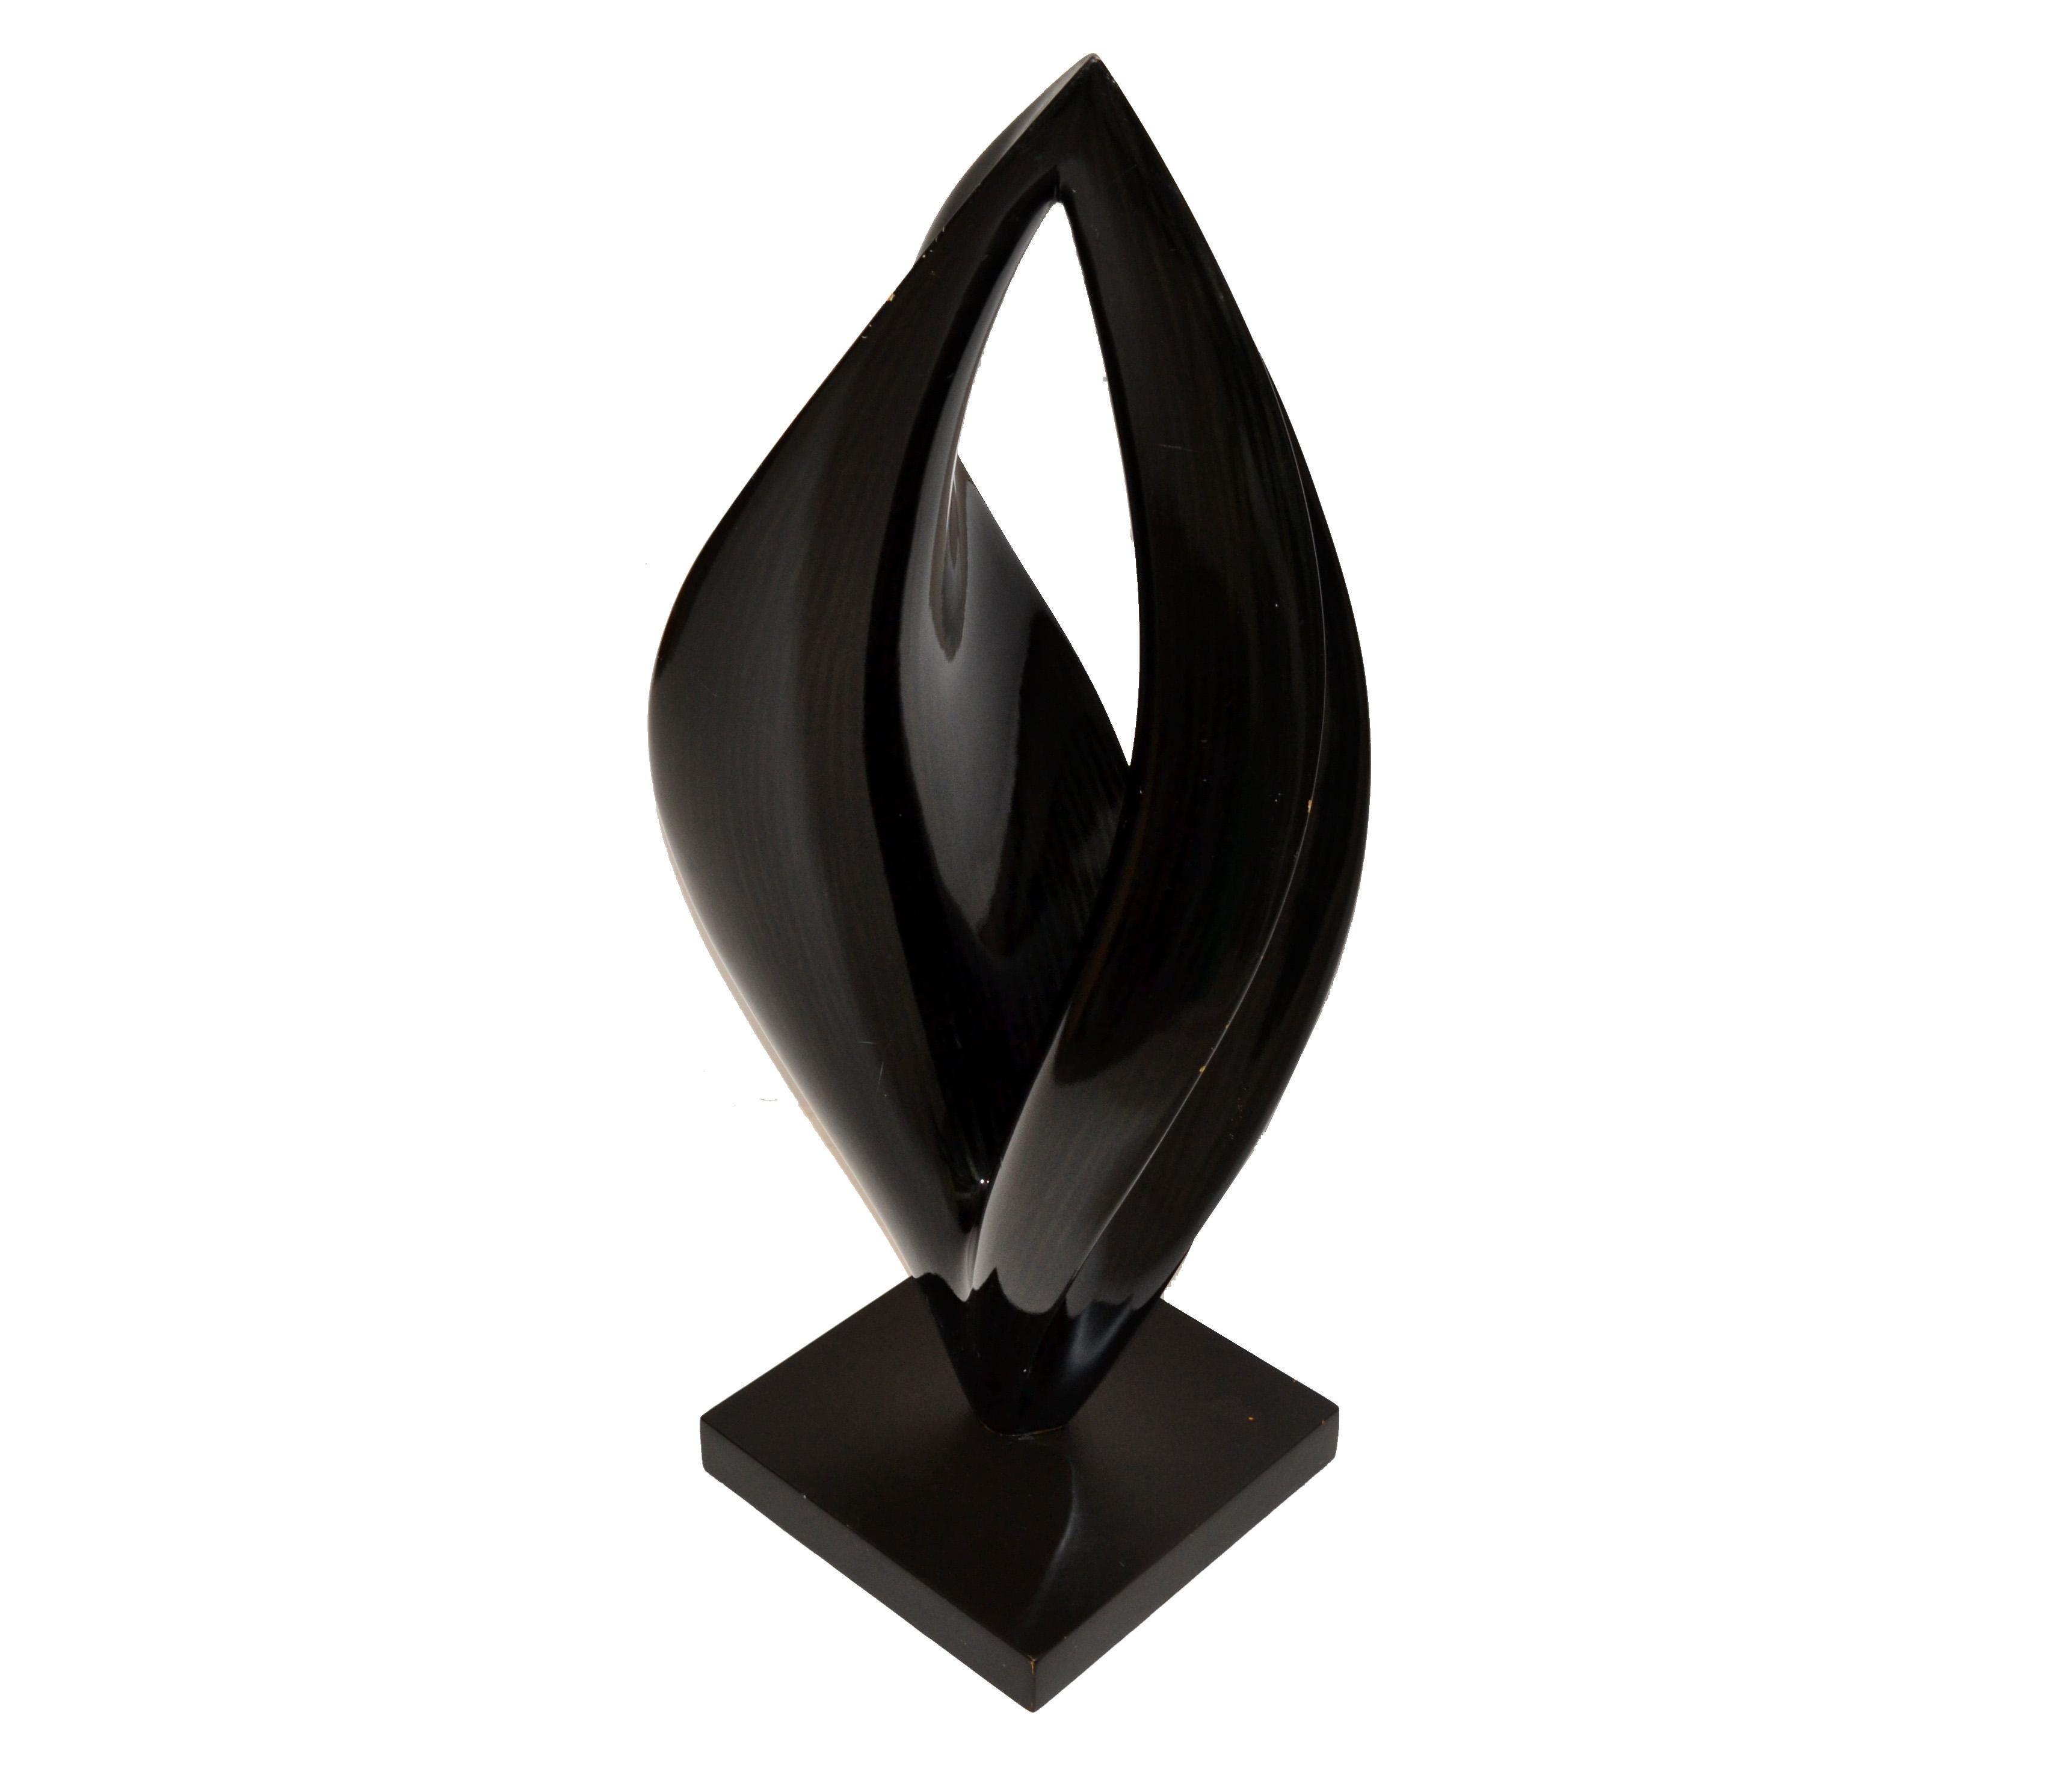 Late 20th Century Black Lacquer Sculptural Wood Mid-Century Modern Fine Art Sculpture Square Base For Sale